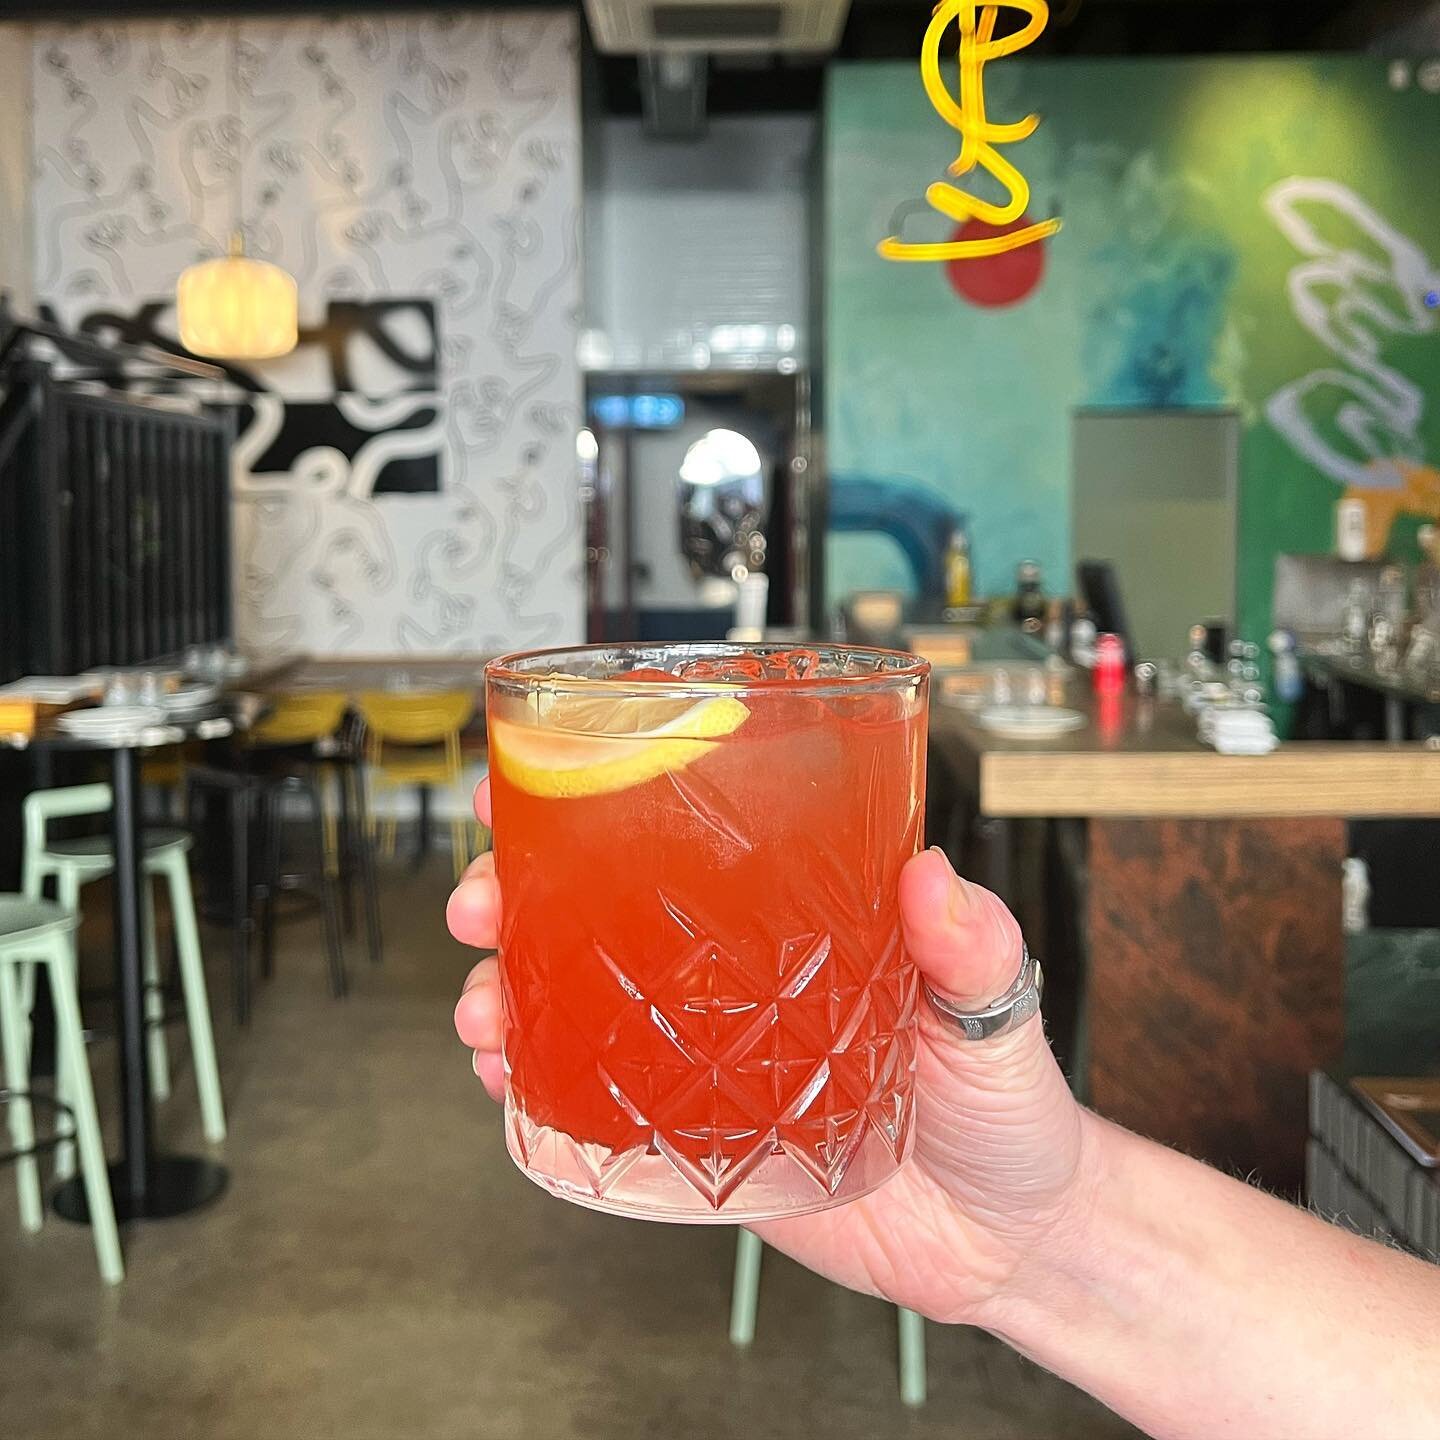 There&rsquo;s a new kid on the block! 

Say hi to the Lions&rsquo;s Porto Tonico, aptly named &lsquo;That Escalated Quickly&rsquo;

This little guy promises big flavours! Made possible with our homemade red capsicum &amp; thyme syrup. A perfect accom